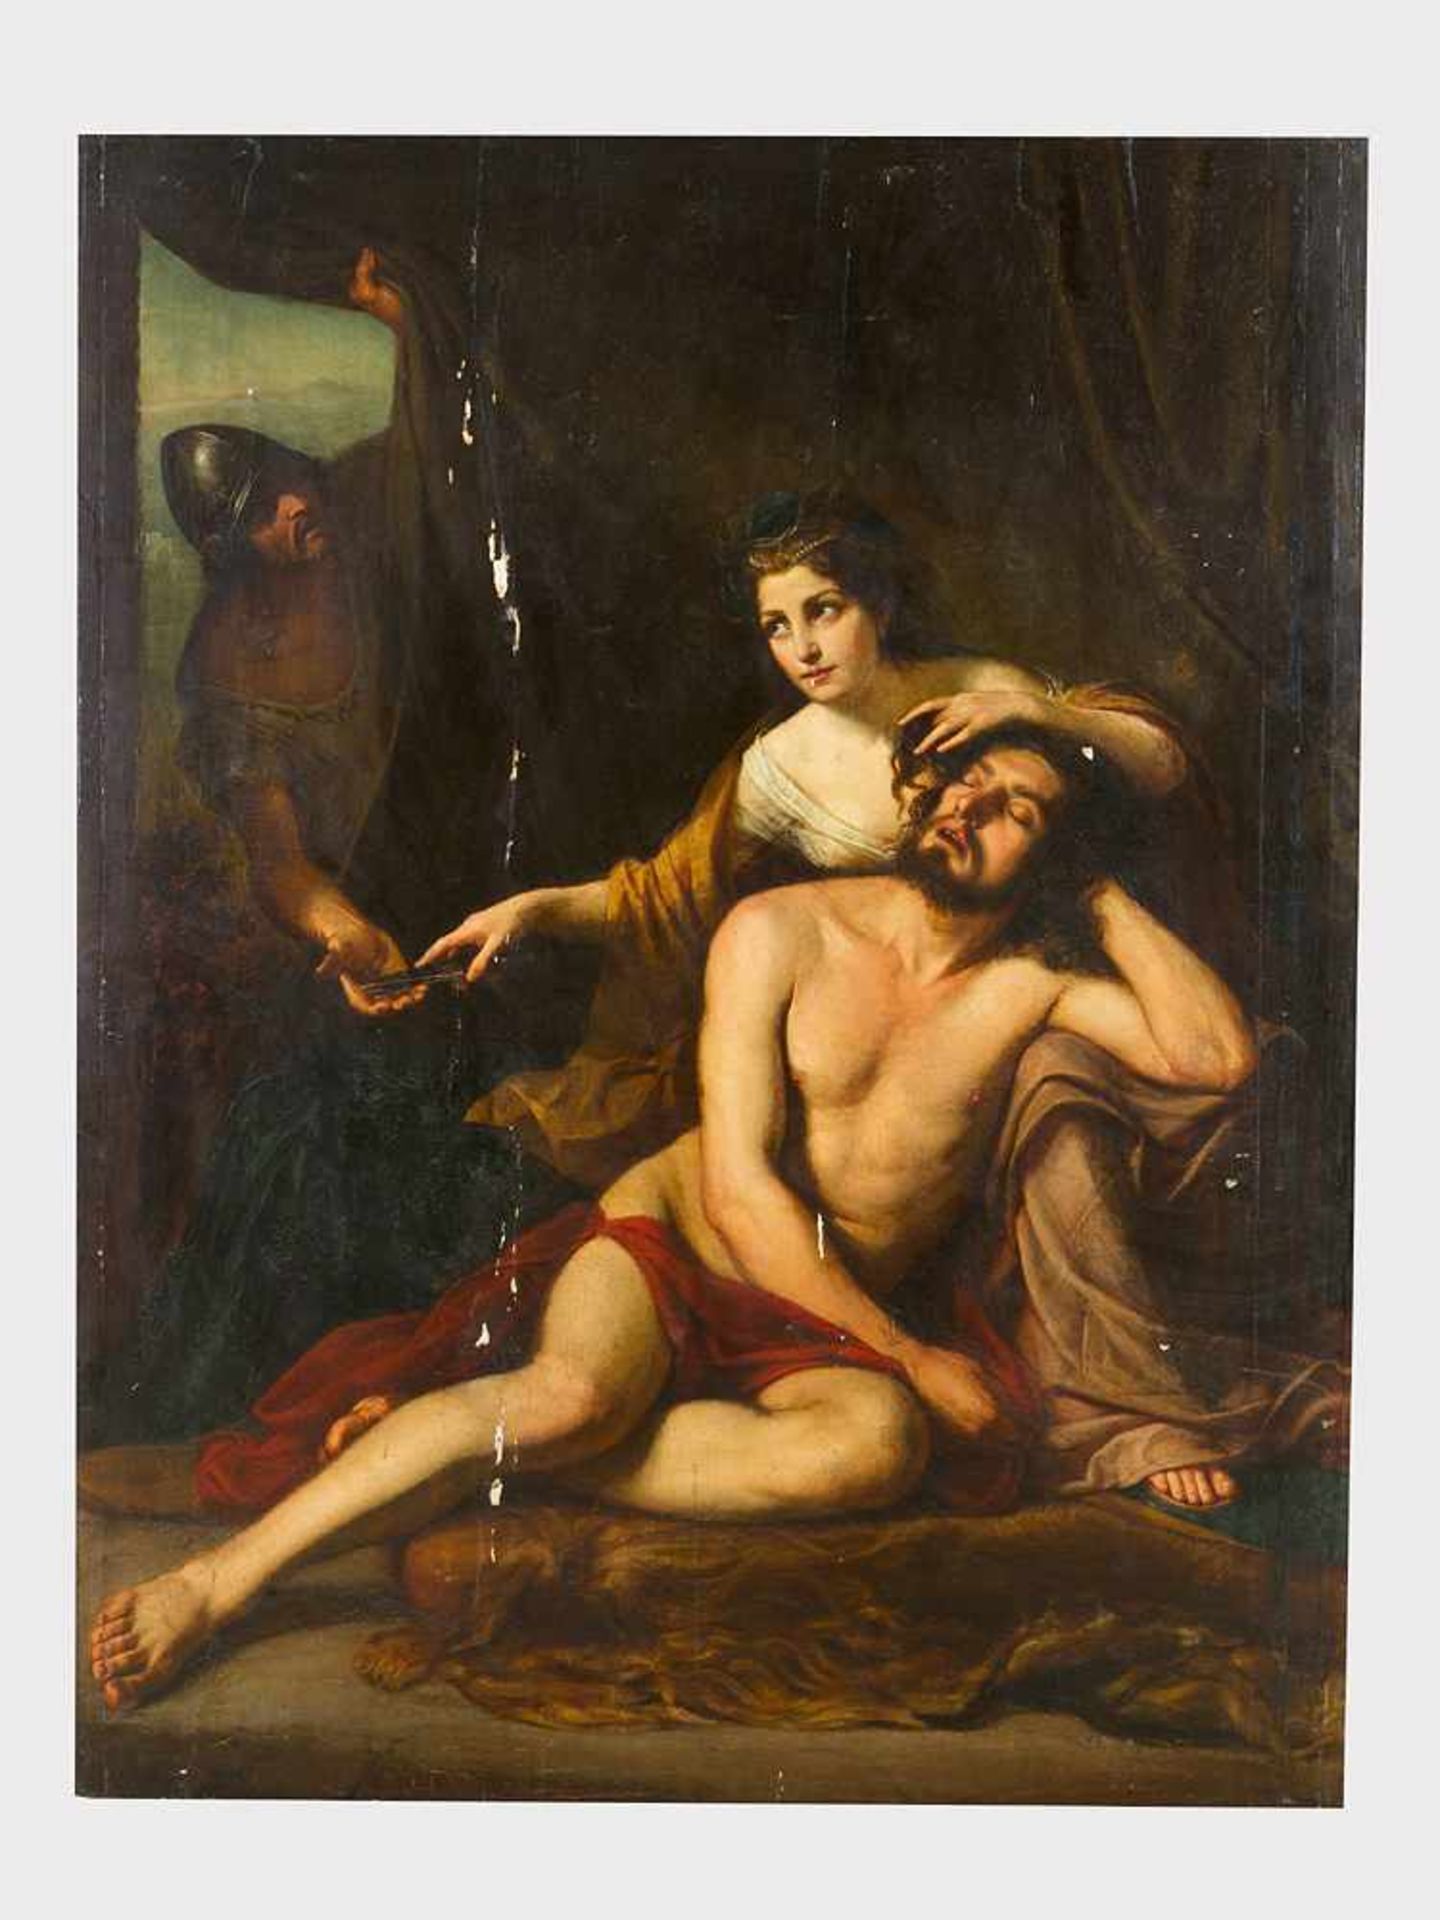 French School around 1800, Samson and Delilah; oil on large wooden panel; damages.170x135cm- - -24.